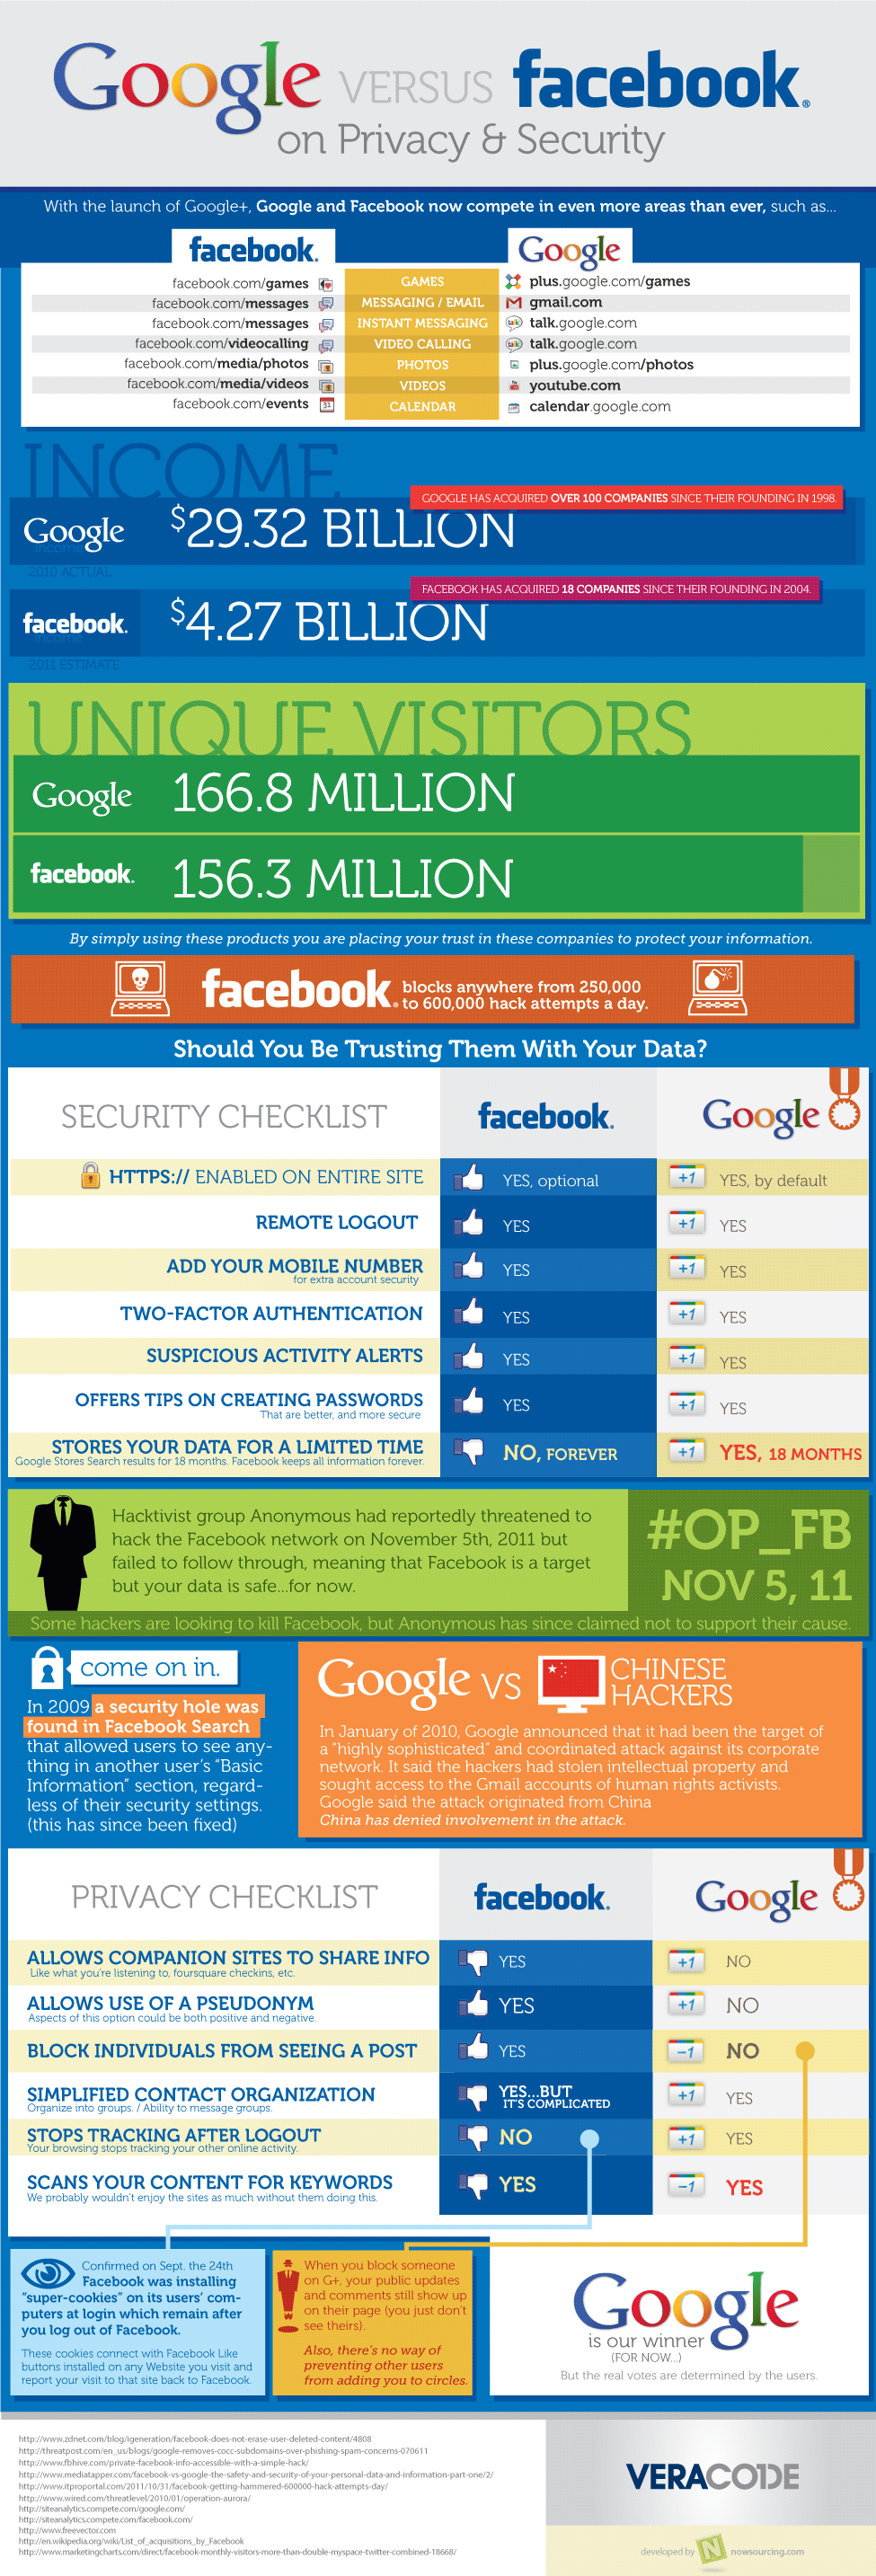 Google Finally Wins One Against Facebook (Infographic)